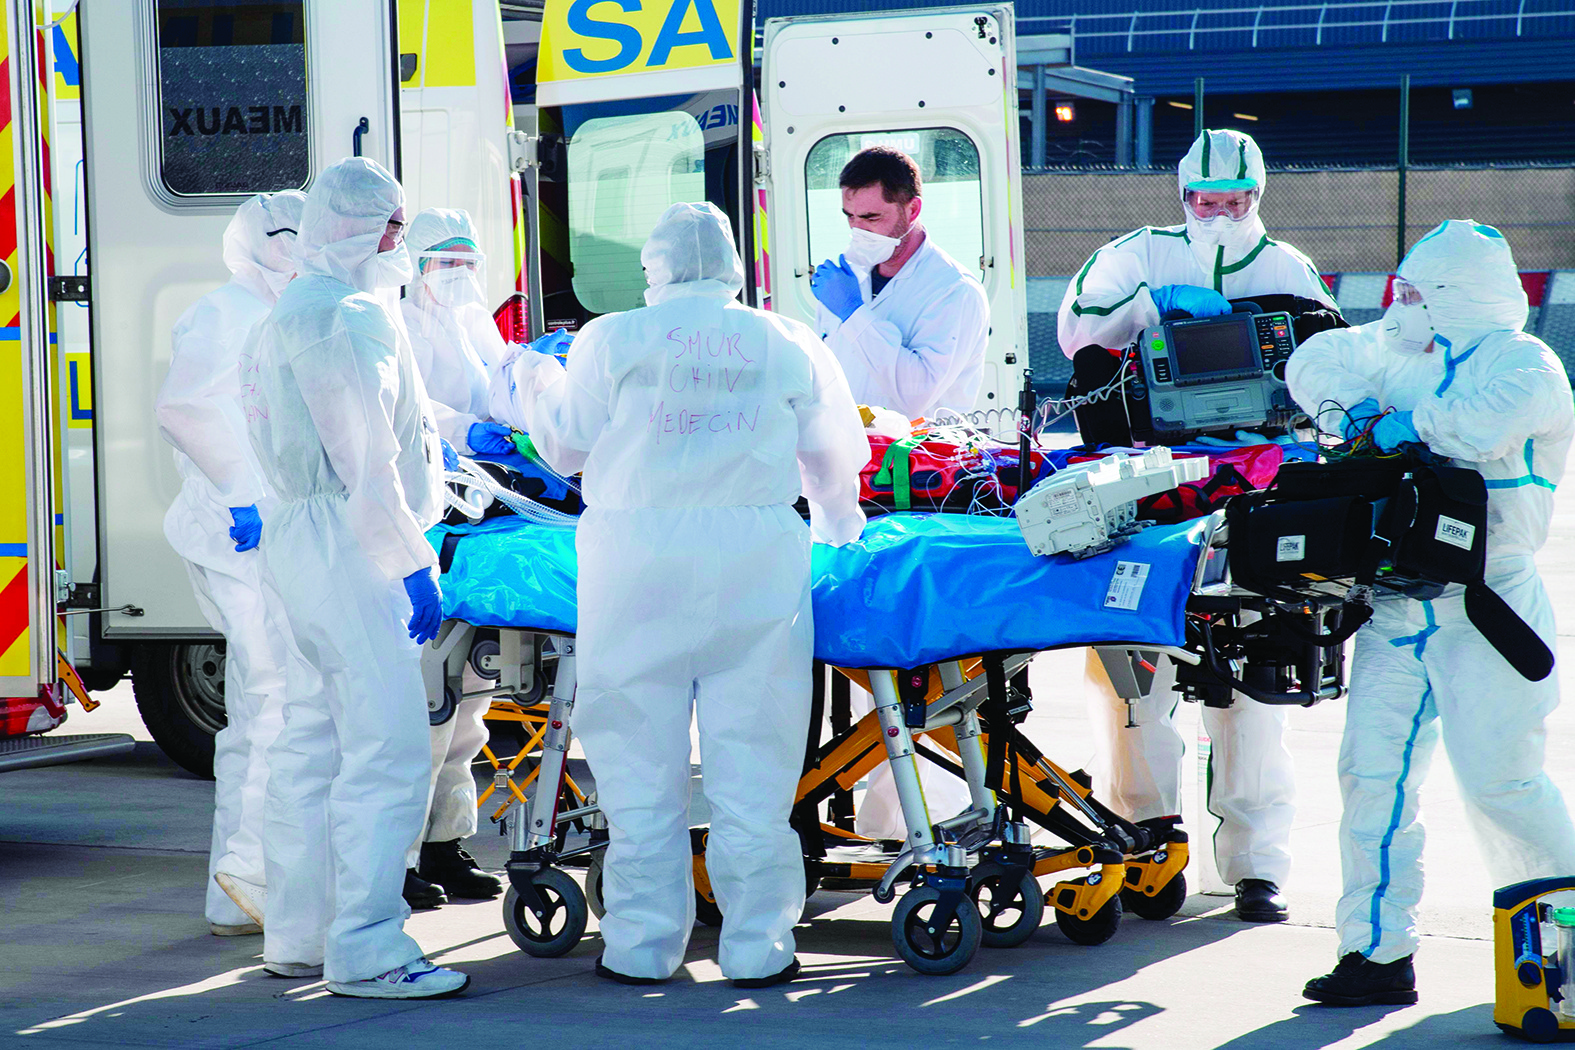 Medical staff load a patient infected with novel coronavirus, Covid-19, into a military A400M plane for transportation from Orly airport, south of the capital, to a hospital outside of the Paris region, on April 4, 2020.nnnnnnnPeople ride abike in the Montmartre district in Paris, on April 1, 2020, on the sixteenth day of a strict lockdown in France to stop the spread of COVID-19 (novel coronavirus). nBERTRAND GUAY / AFPnBERTRAND GUAY / AFP - Orly airport, now closed to travellers, has been turned into an evacuation hub as part of an operation aiming at relieving hospitals in the Paris region, hardly hit by the Covid-19 outbreak caused by the novel coronavirus. (Photo by BERTRAND GUAY / AFP)